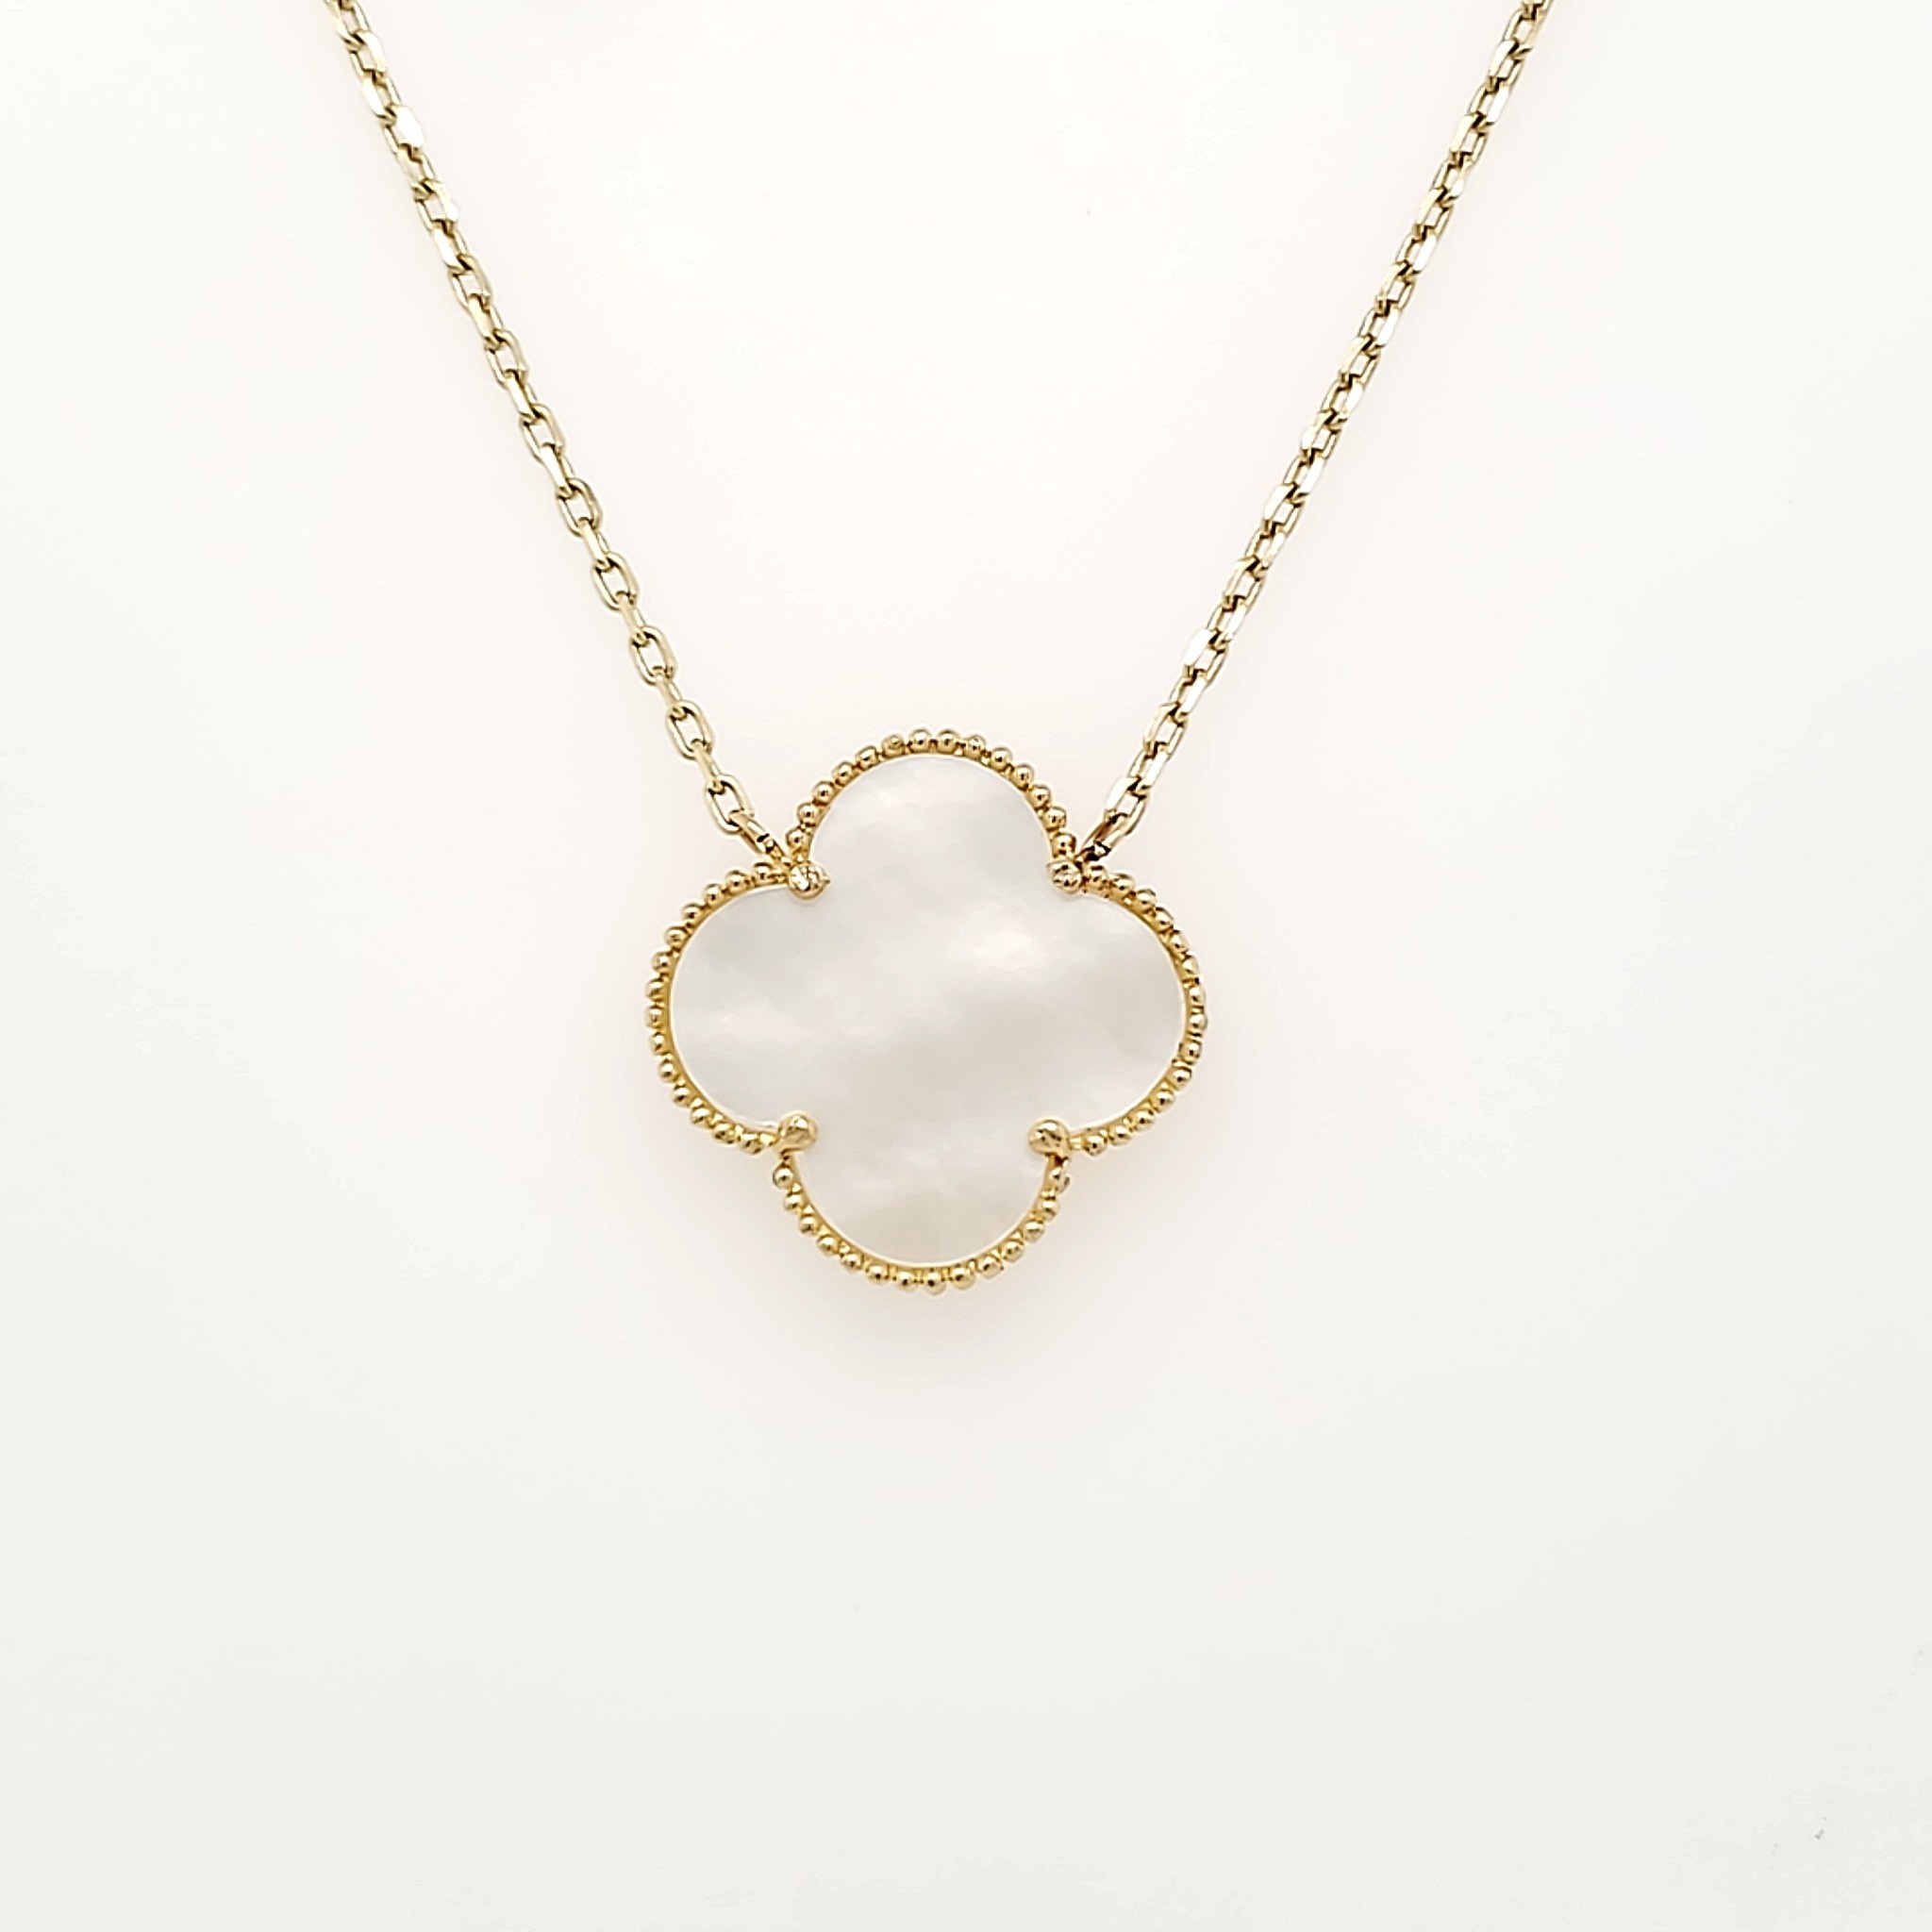 Mother-of-Pearl Micro Paved Clover 14k Gold Filled Adjustable Necklace -  necklace